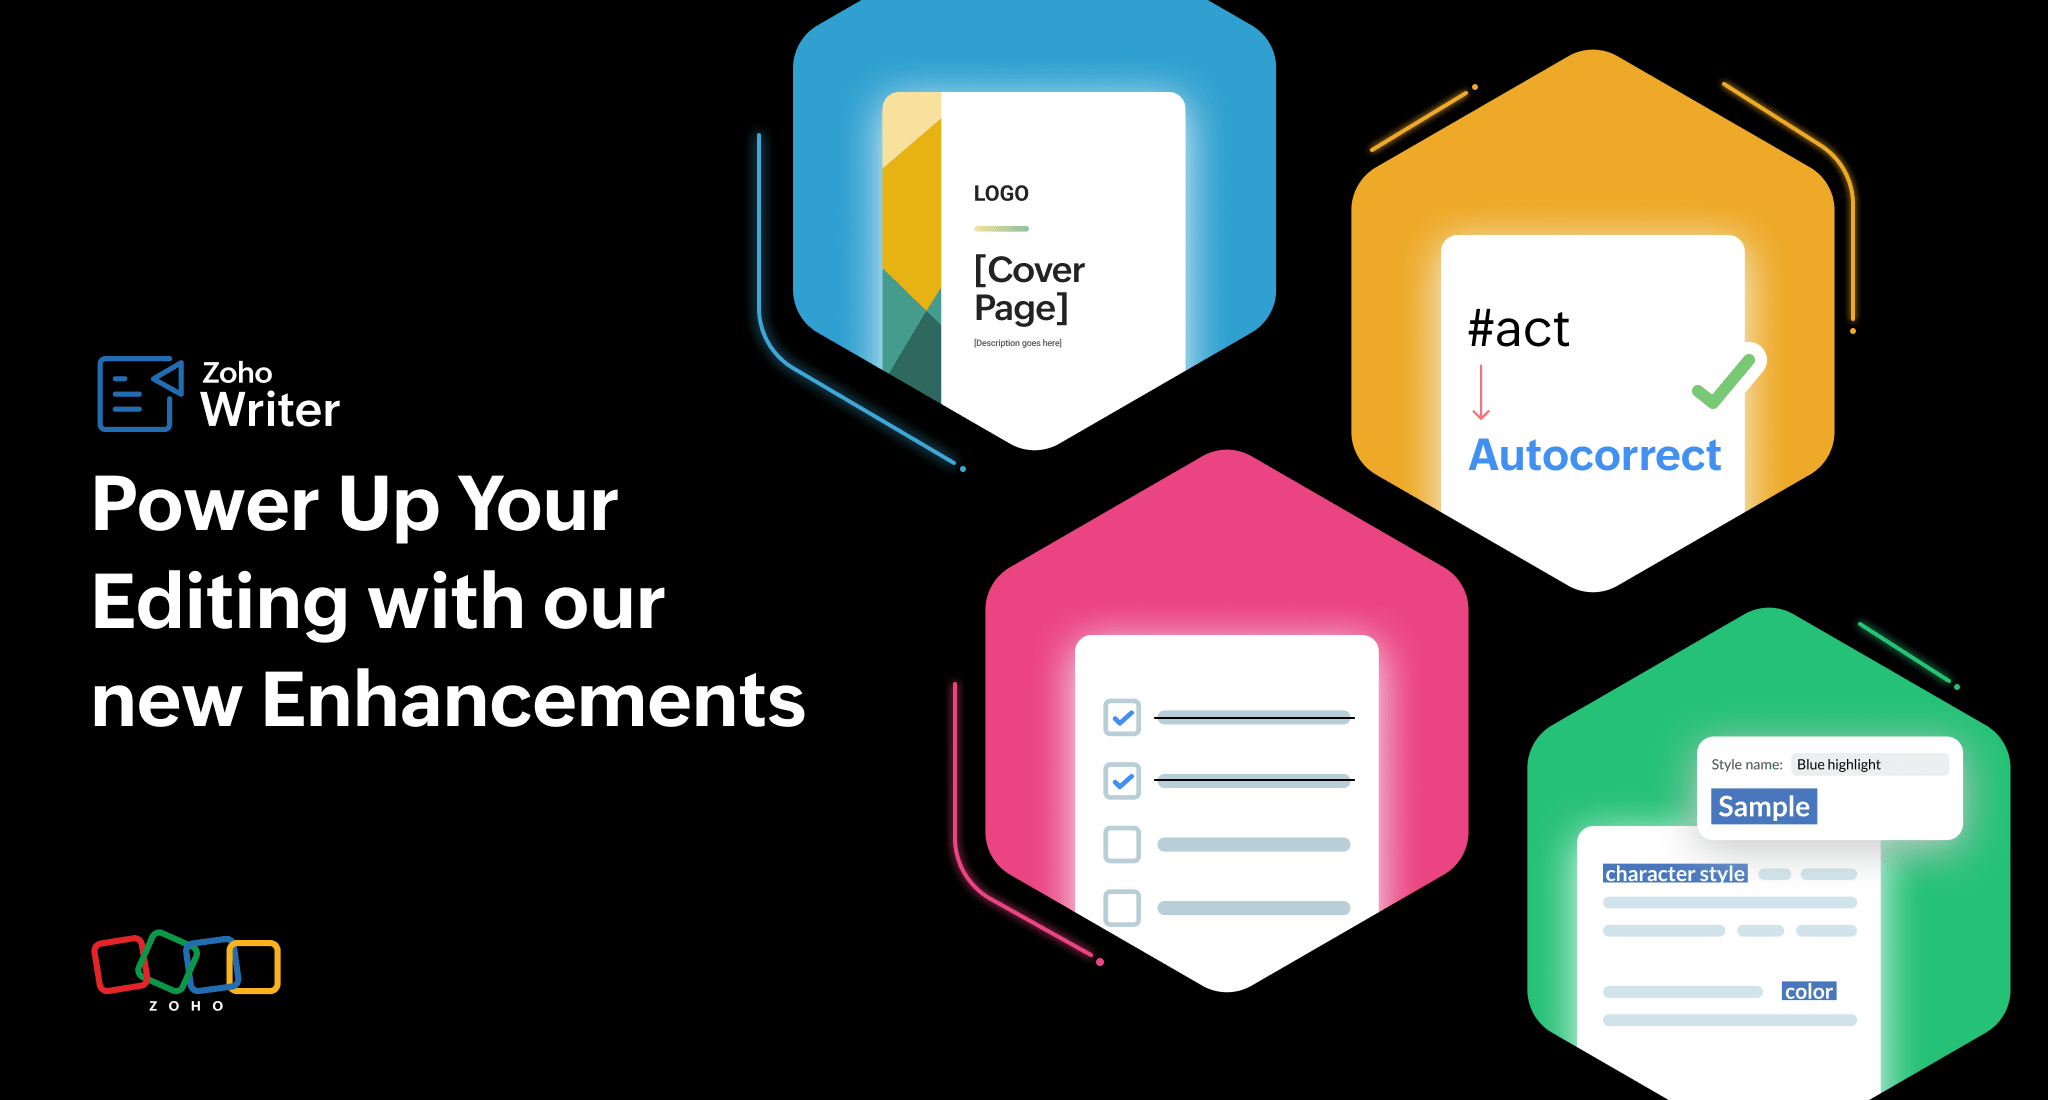 Accelerate document formatting with Zoho Writer's advanced capabilities